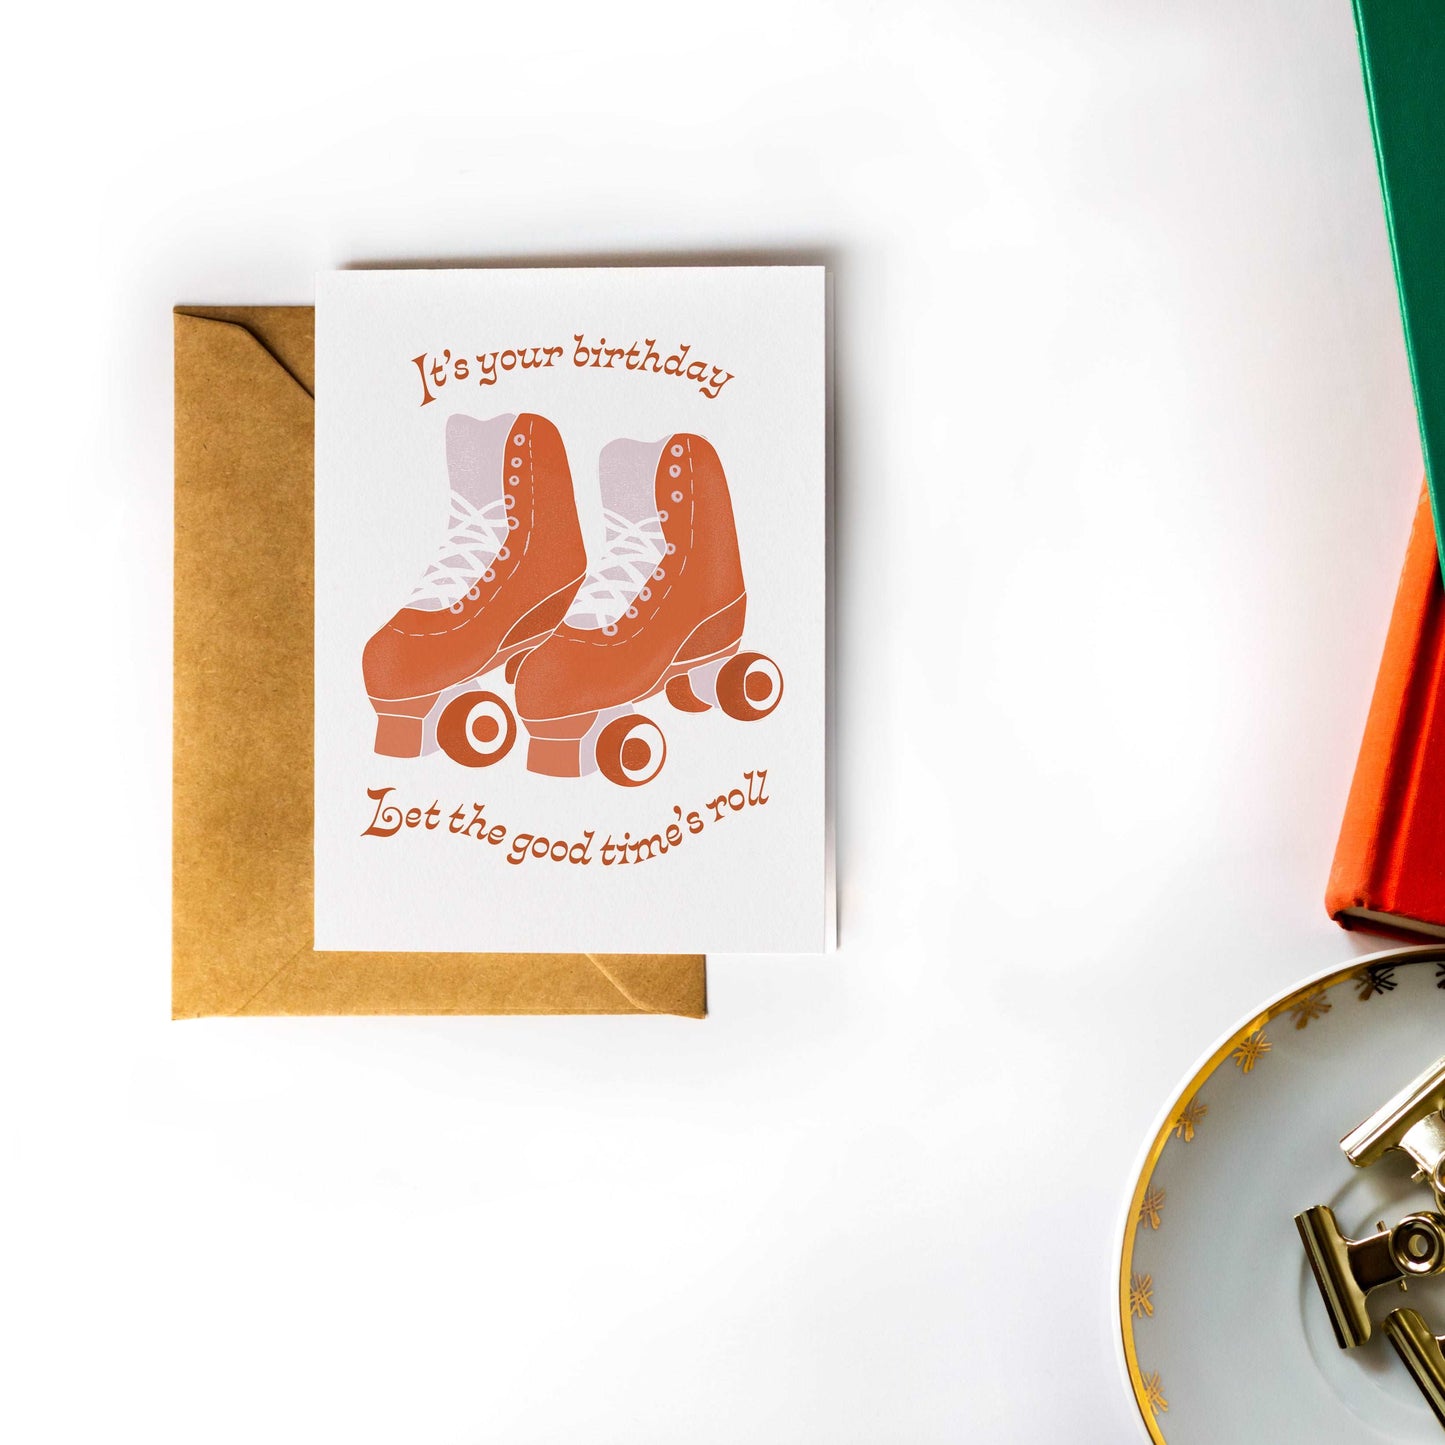 It's Your Birthday, Let the Good Times Roll - Birthday Card